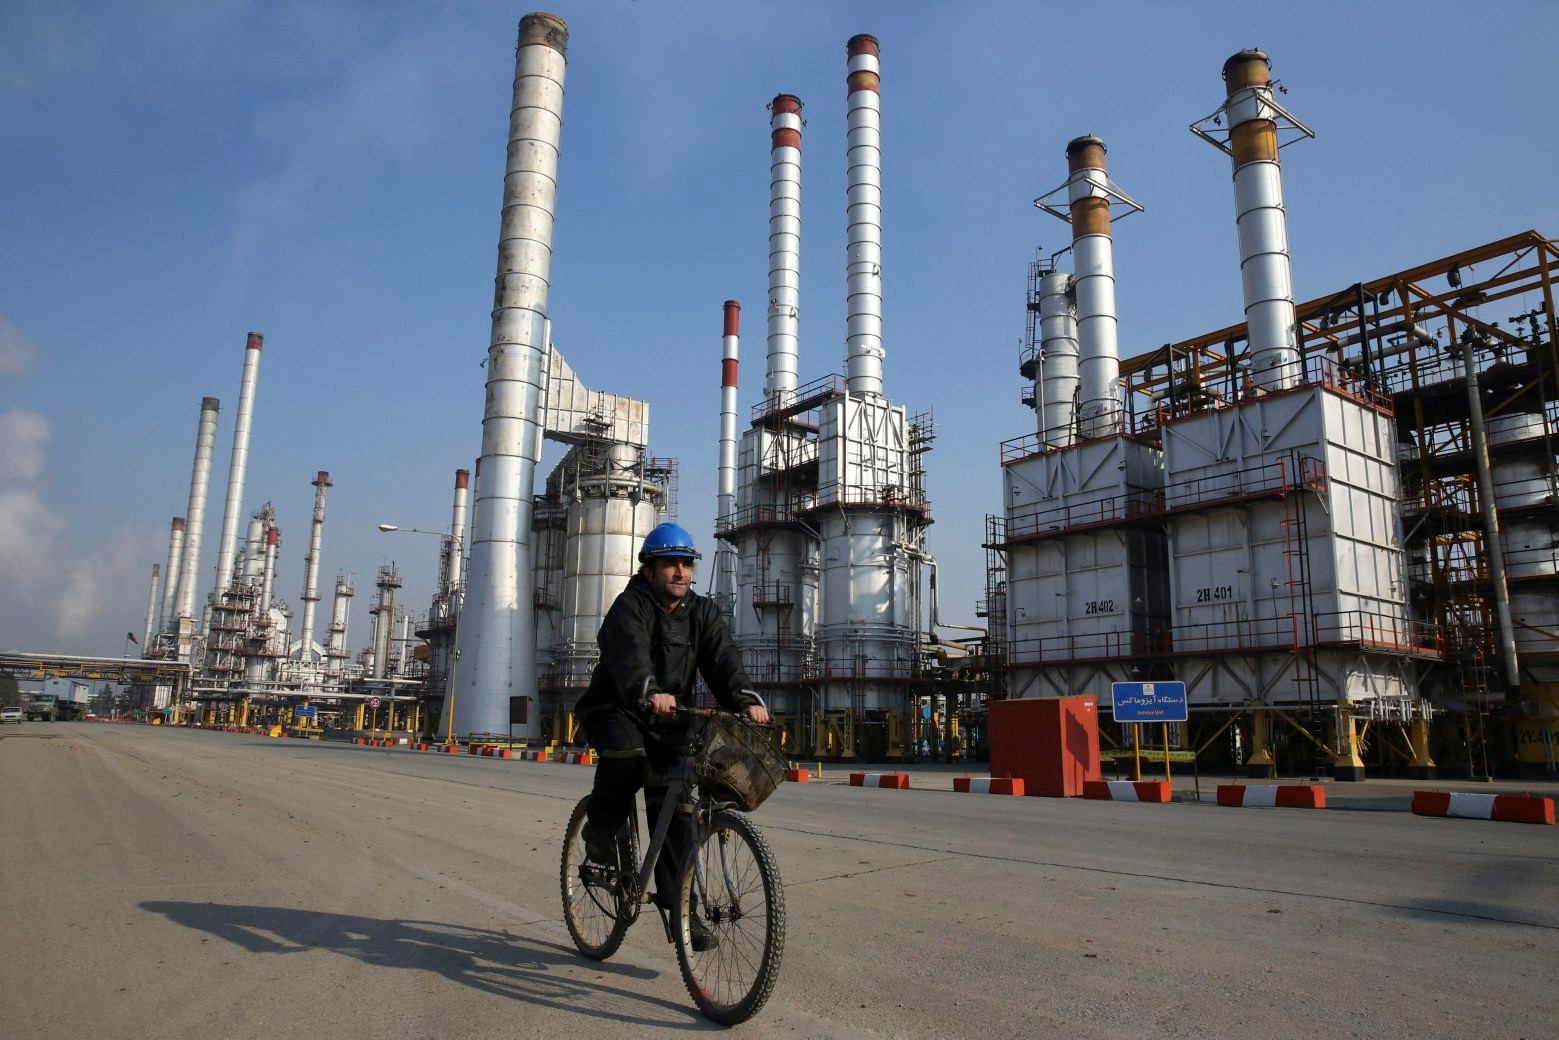 FILE - In this Dec. 22, 2014 file photo, an Iranian oil worker rides his bicycle at the Tehran's oil refinery south of the capital Tehran, Iran. With a historic nuclear deal between Iran, the U.S. and five other world powers set into place this weekend, a European oil embargo on the world's seventh-largest oil producer will end. The most immediate fallout may be a steep drop in crude oil prices starting with the Asian market on Monday, Jan. 18, 2016. (AP Photo/Vahid Salemi, File) Iran Nuclear Deal Oil